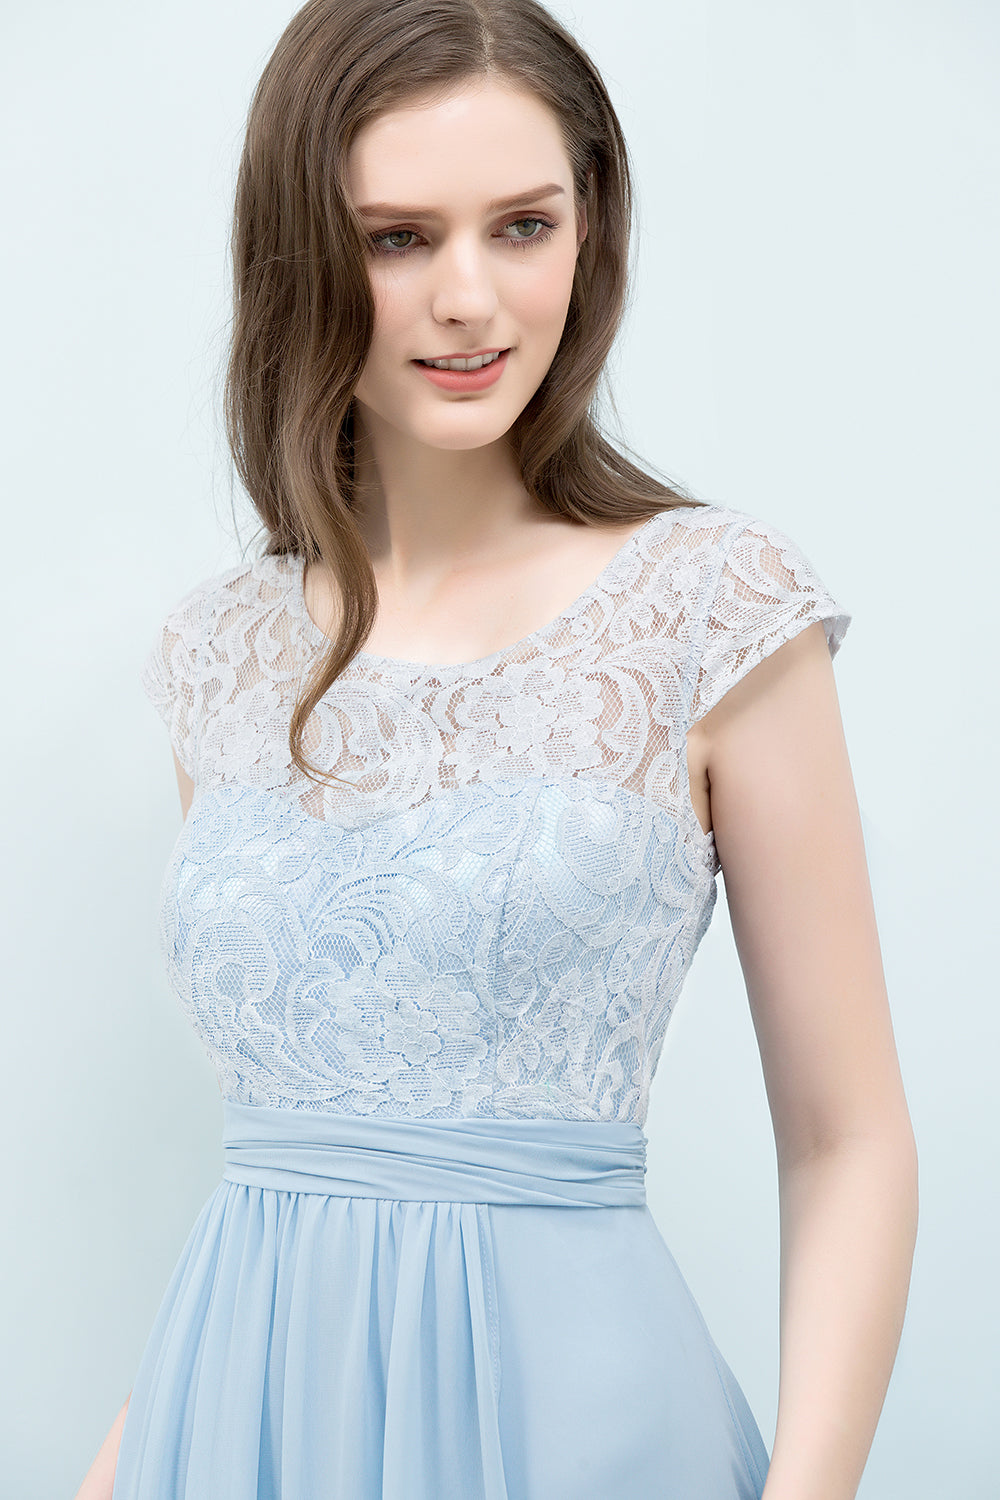 Affordable Lace Sleeveless Blue Bridesmaid Dresses With Scoop Cap